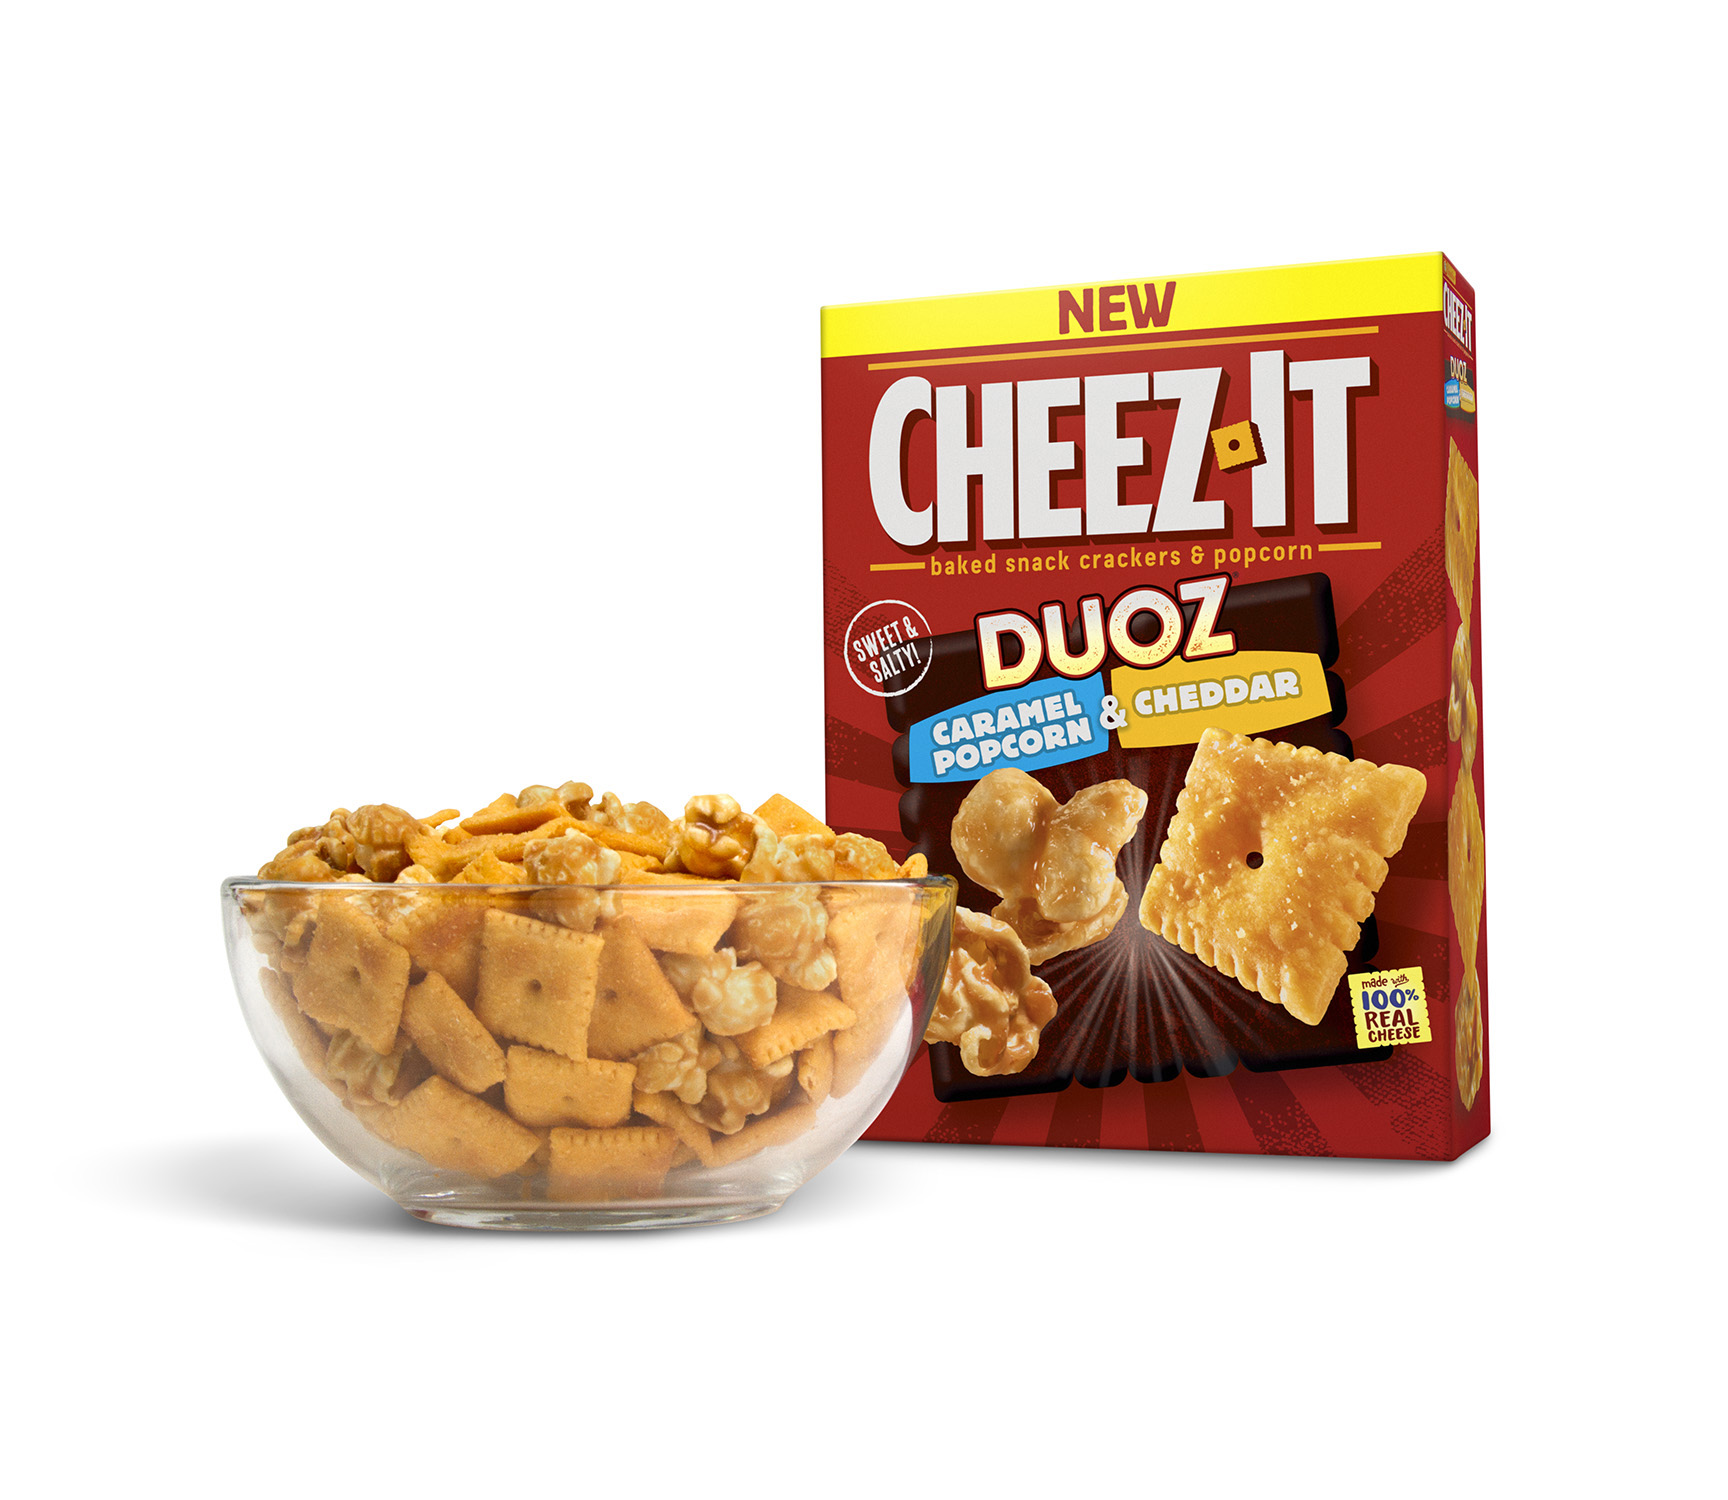 Cheez-It launches new caramel popcorn Duoz variety